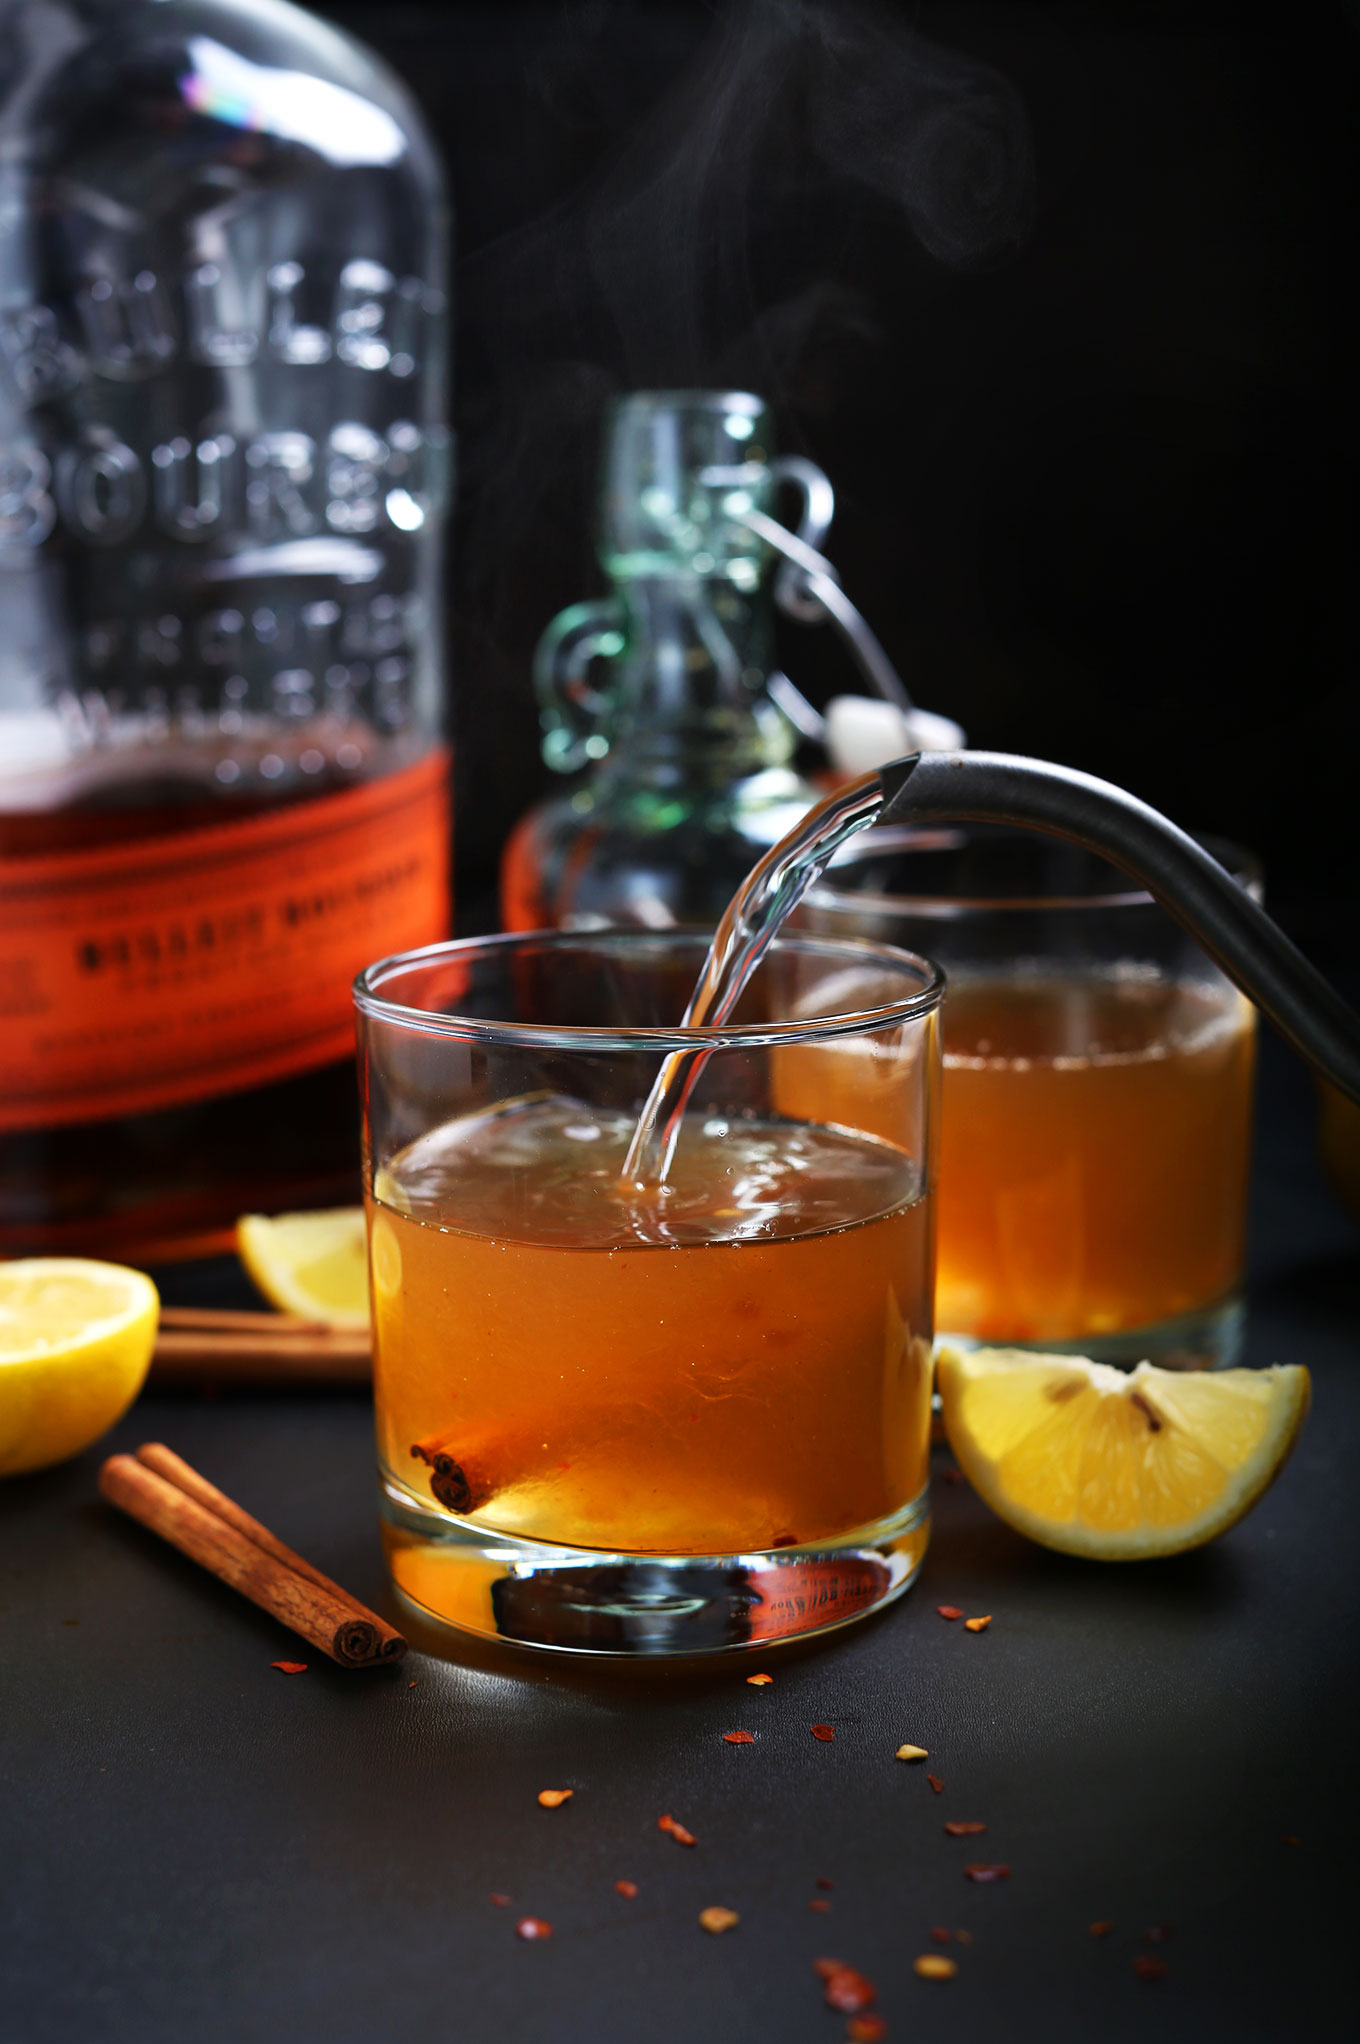 SWEET-southing-Chili-Cinnamon-Hot-Toddy-with-Bourbon-and-Lemon-Just-7-ingredients-and-naturally-sweetened-vegan